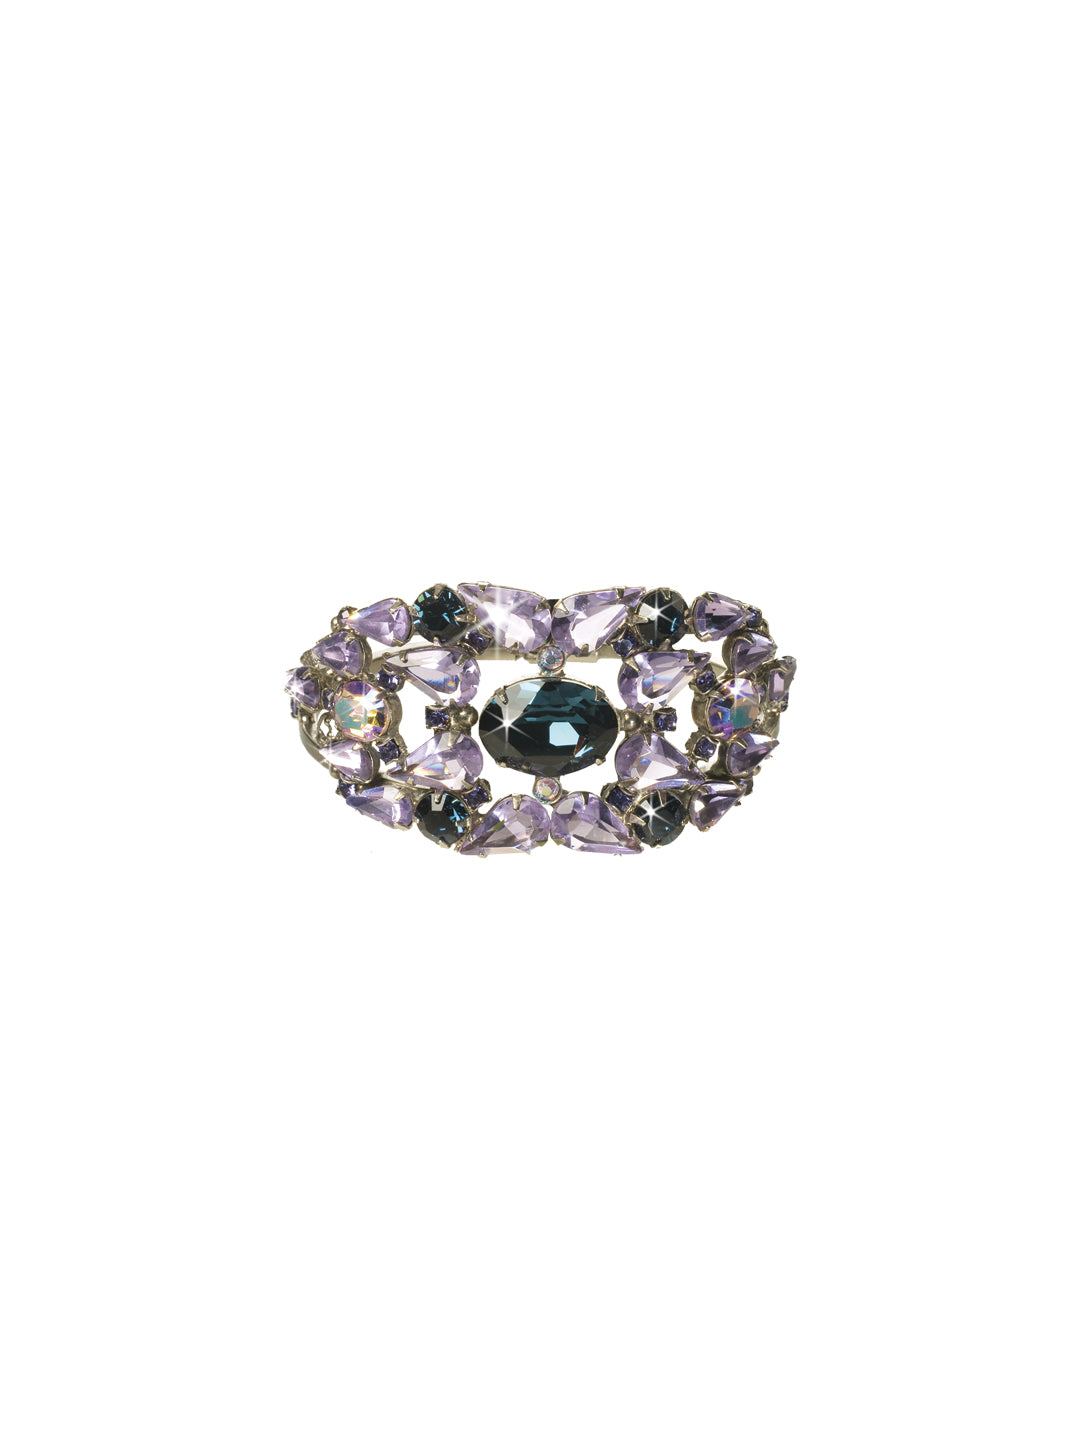 Center of Attention Cuff - BCP6ASHY - Holy sparkle! This cuff bracelet features a stunning center jewel with layers of radiating crystals. Prepare to have all eyes on you and your brilliant bauble! From Sorrelli's Hydrangea collection in our Antique Silver-tone finish.